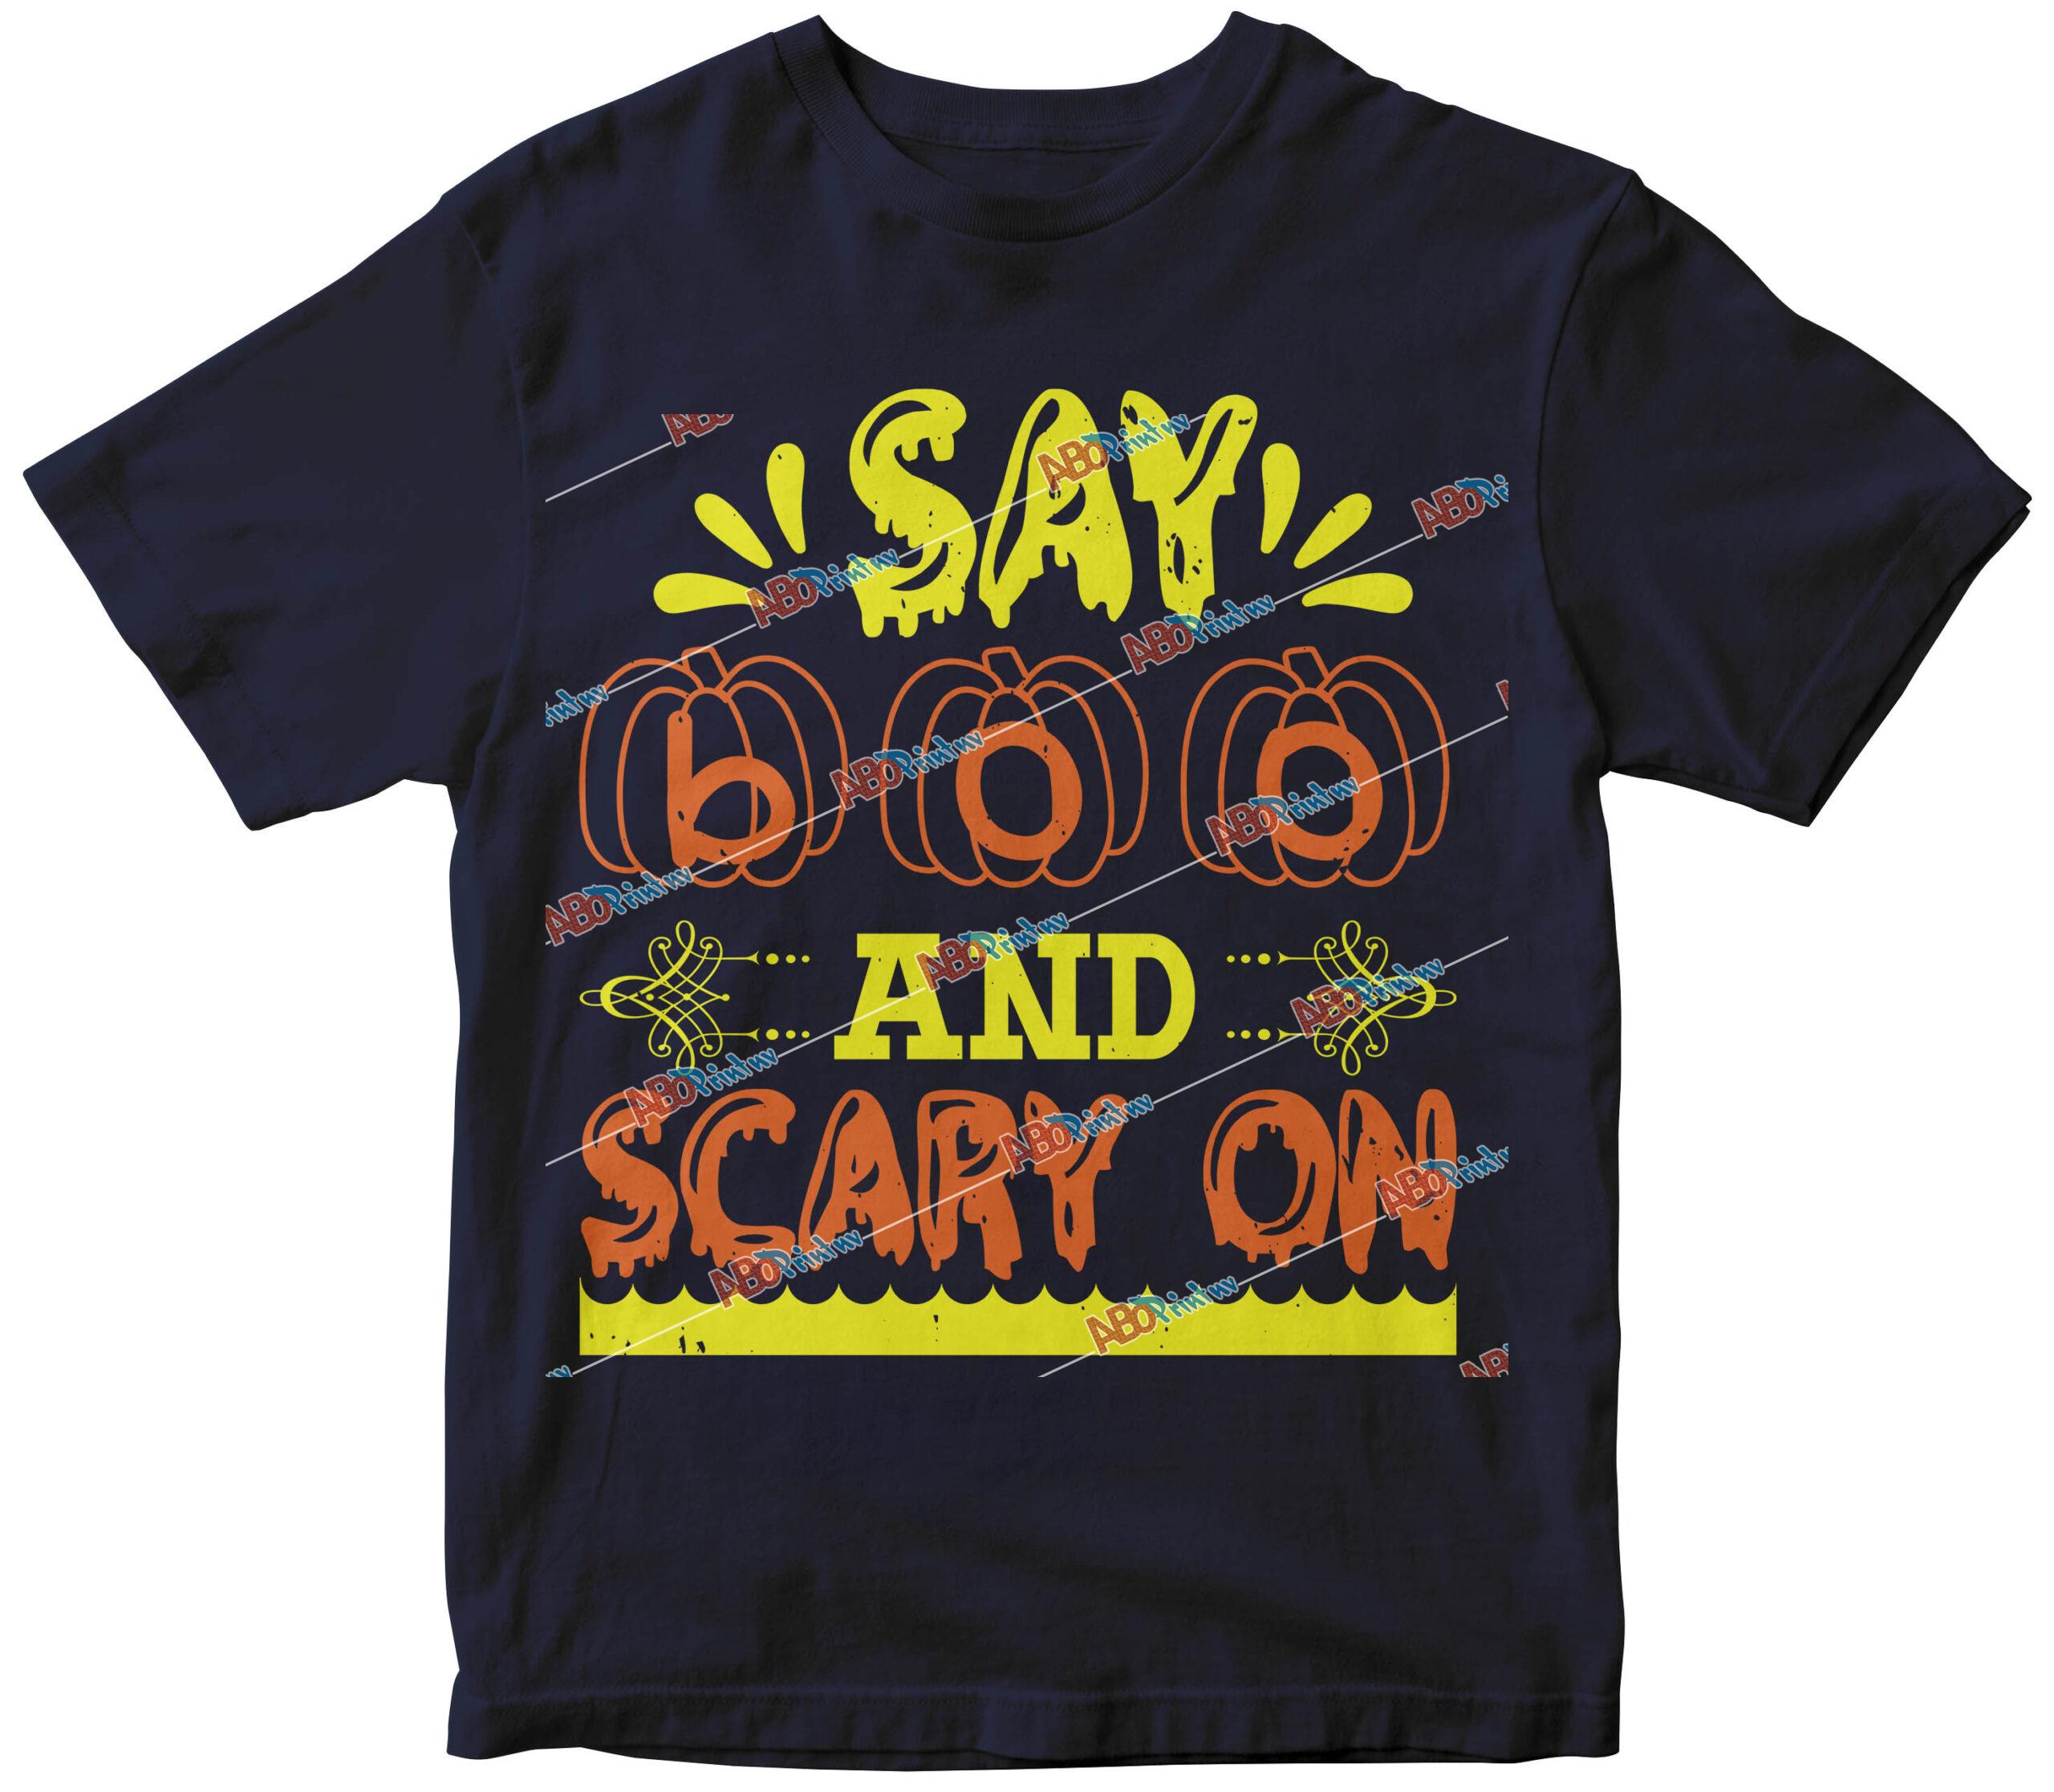 Say boo and scary on-01.jpg